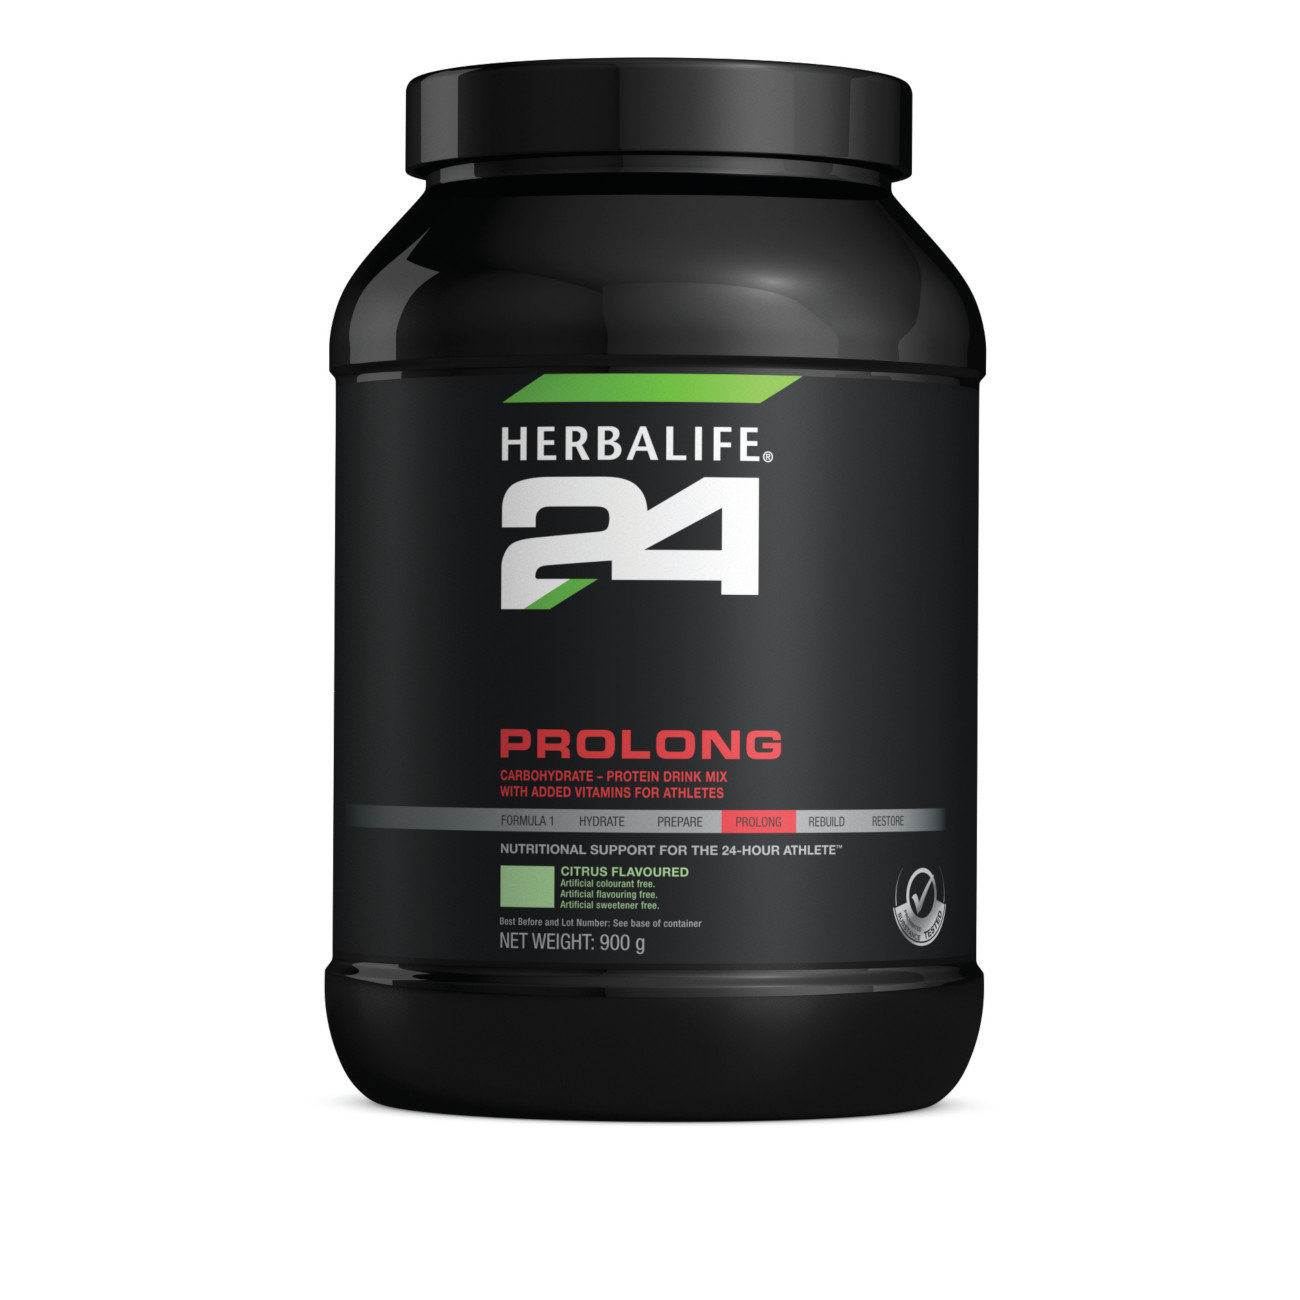 Herbalife24® Prolong Protein Drink Citrus product shot.